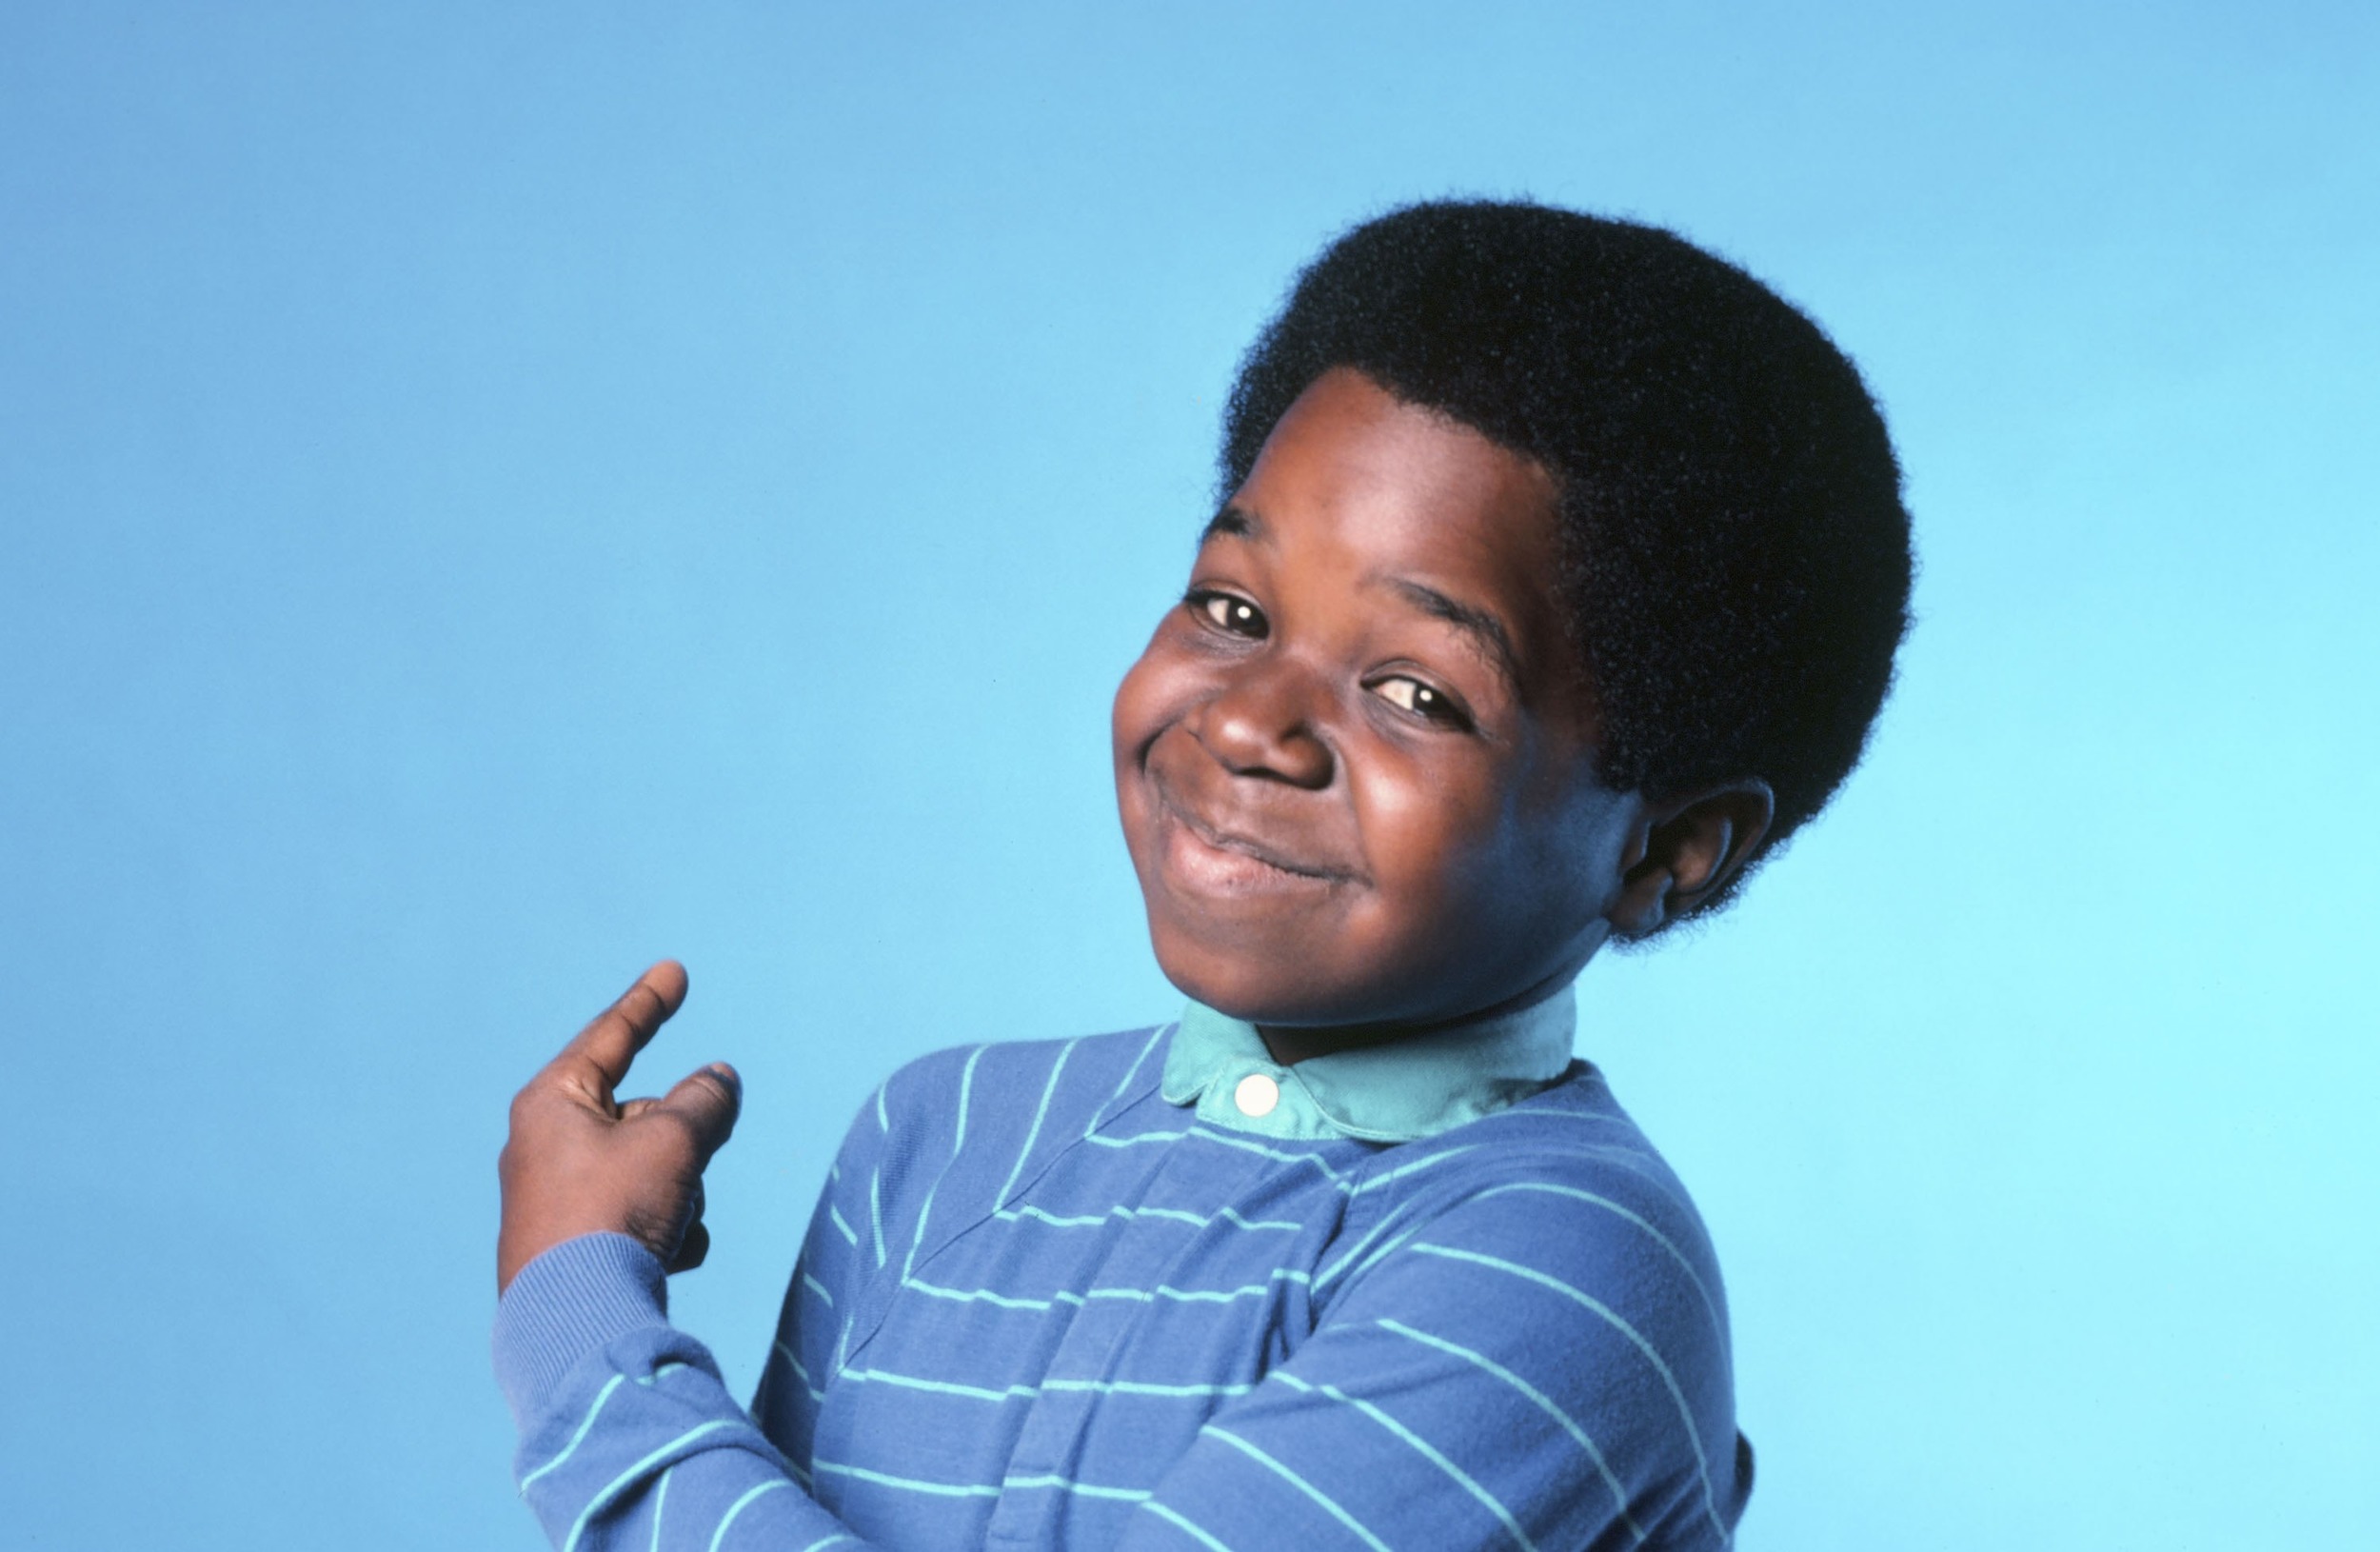 Pictures of Gary Coleman, Picture #168635 - Pictures Of Celebrities